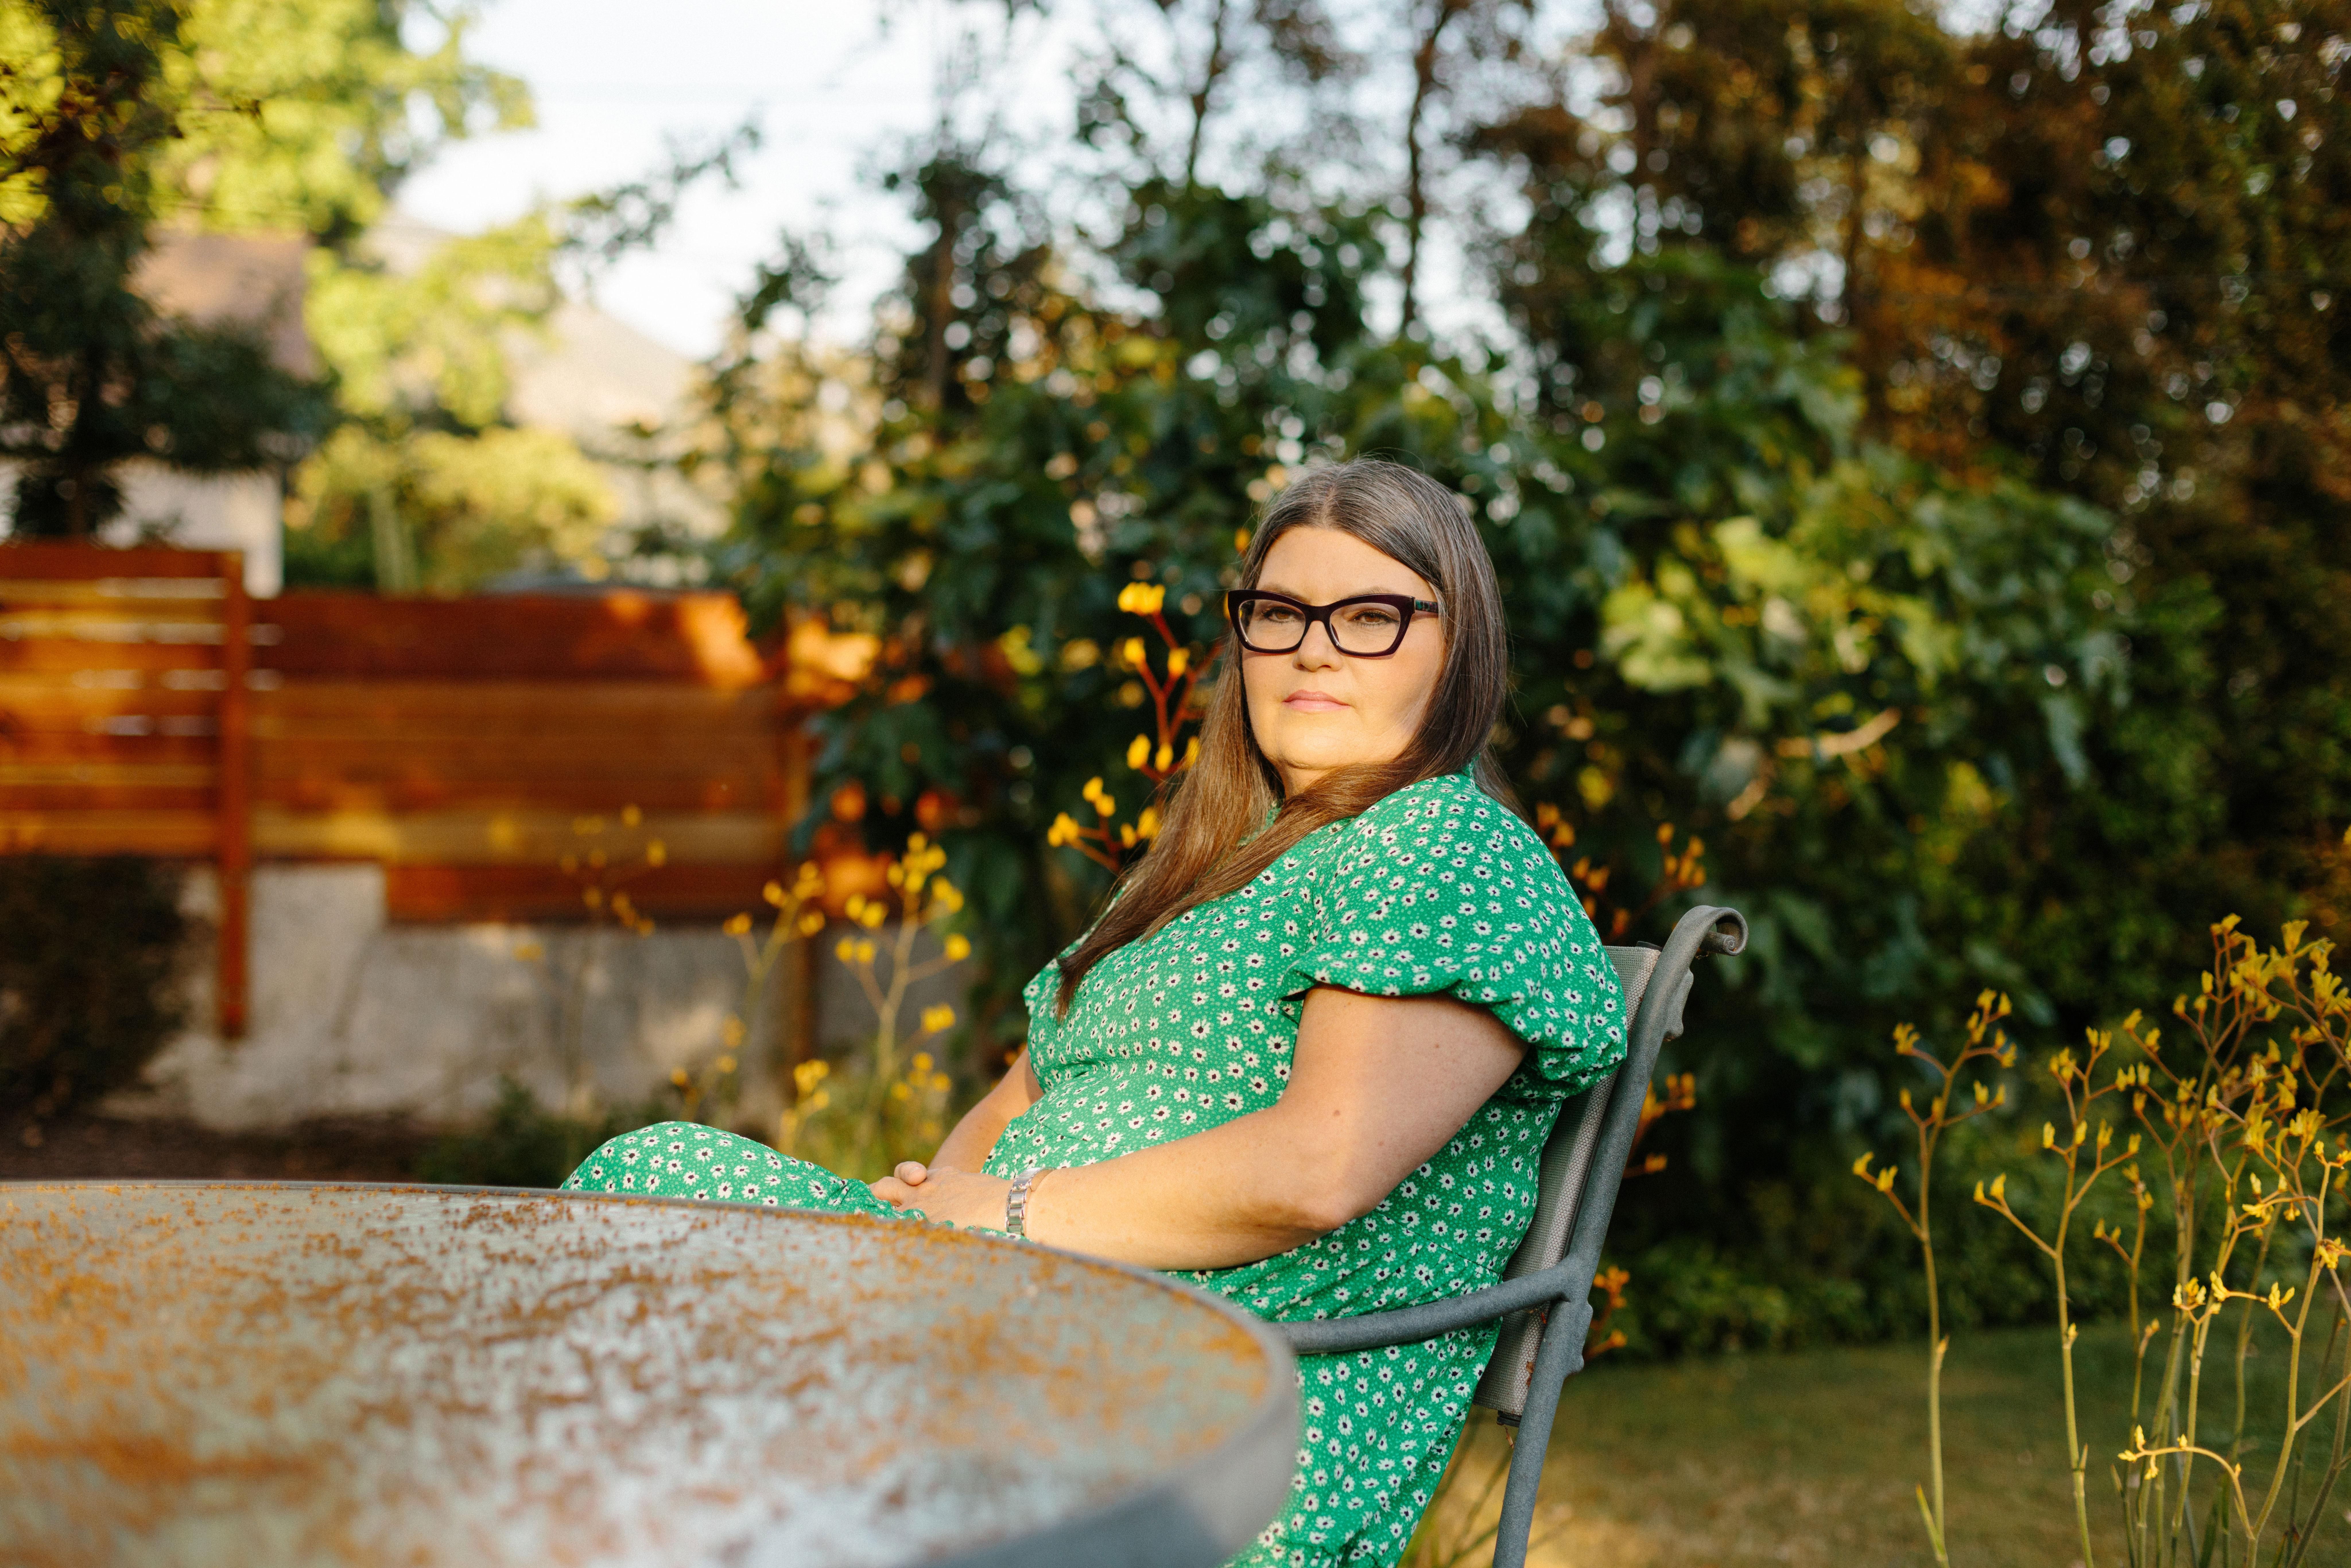 An image of Victoria Knapp sitting at a table in her back yard.